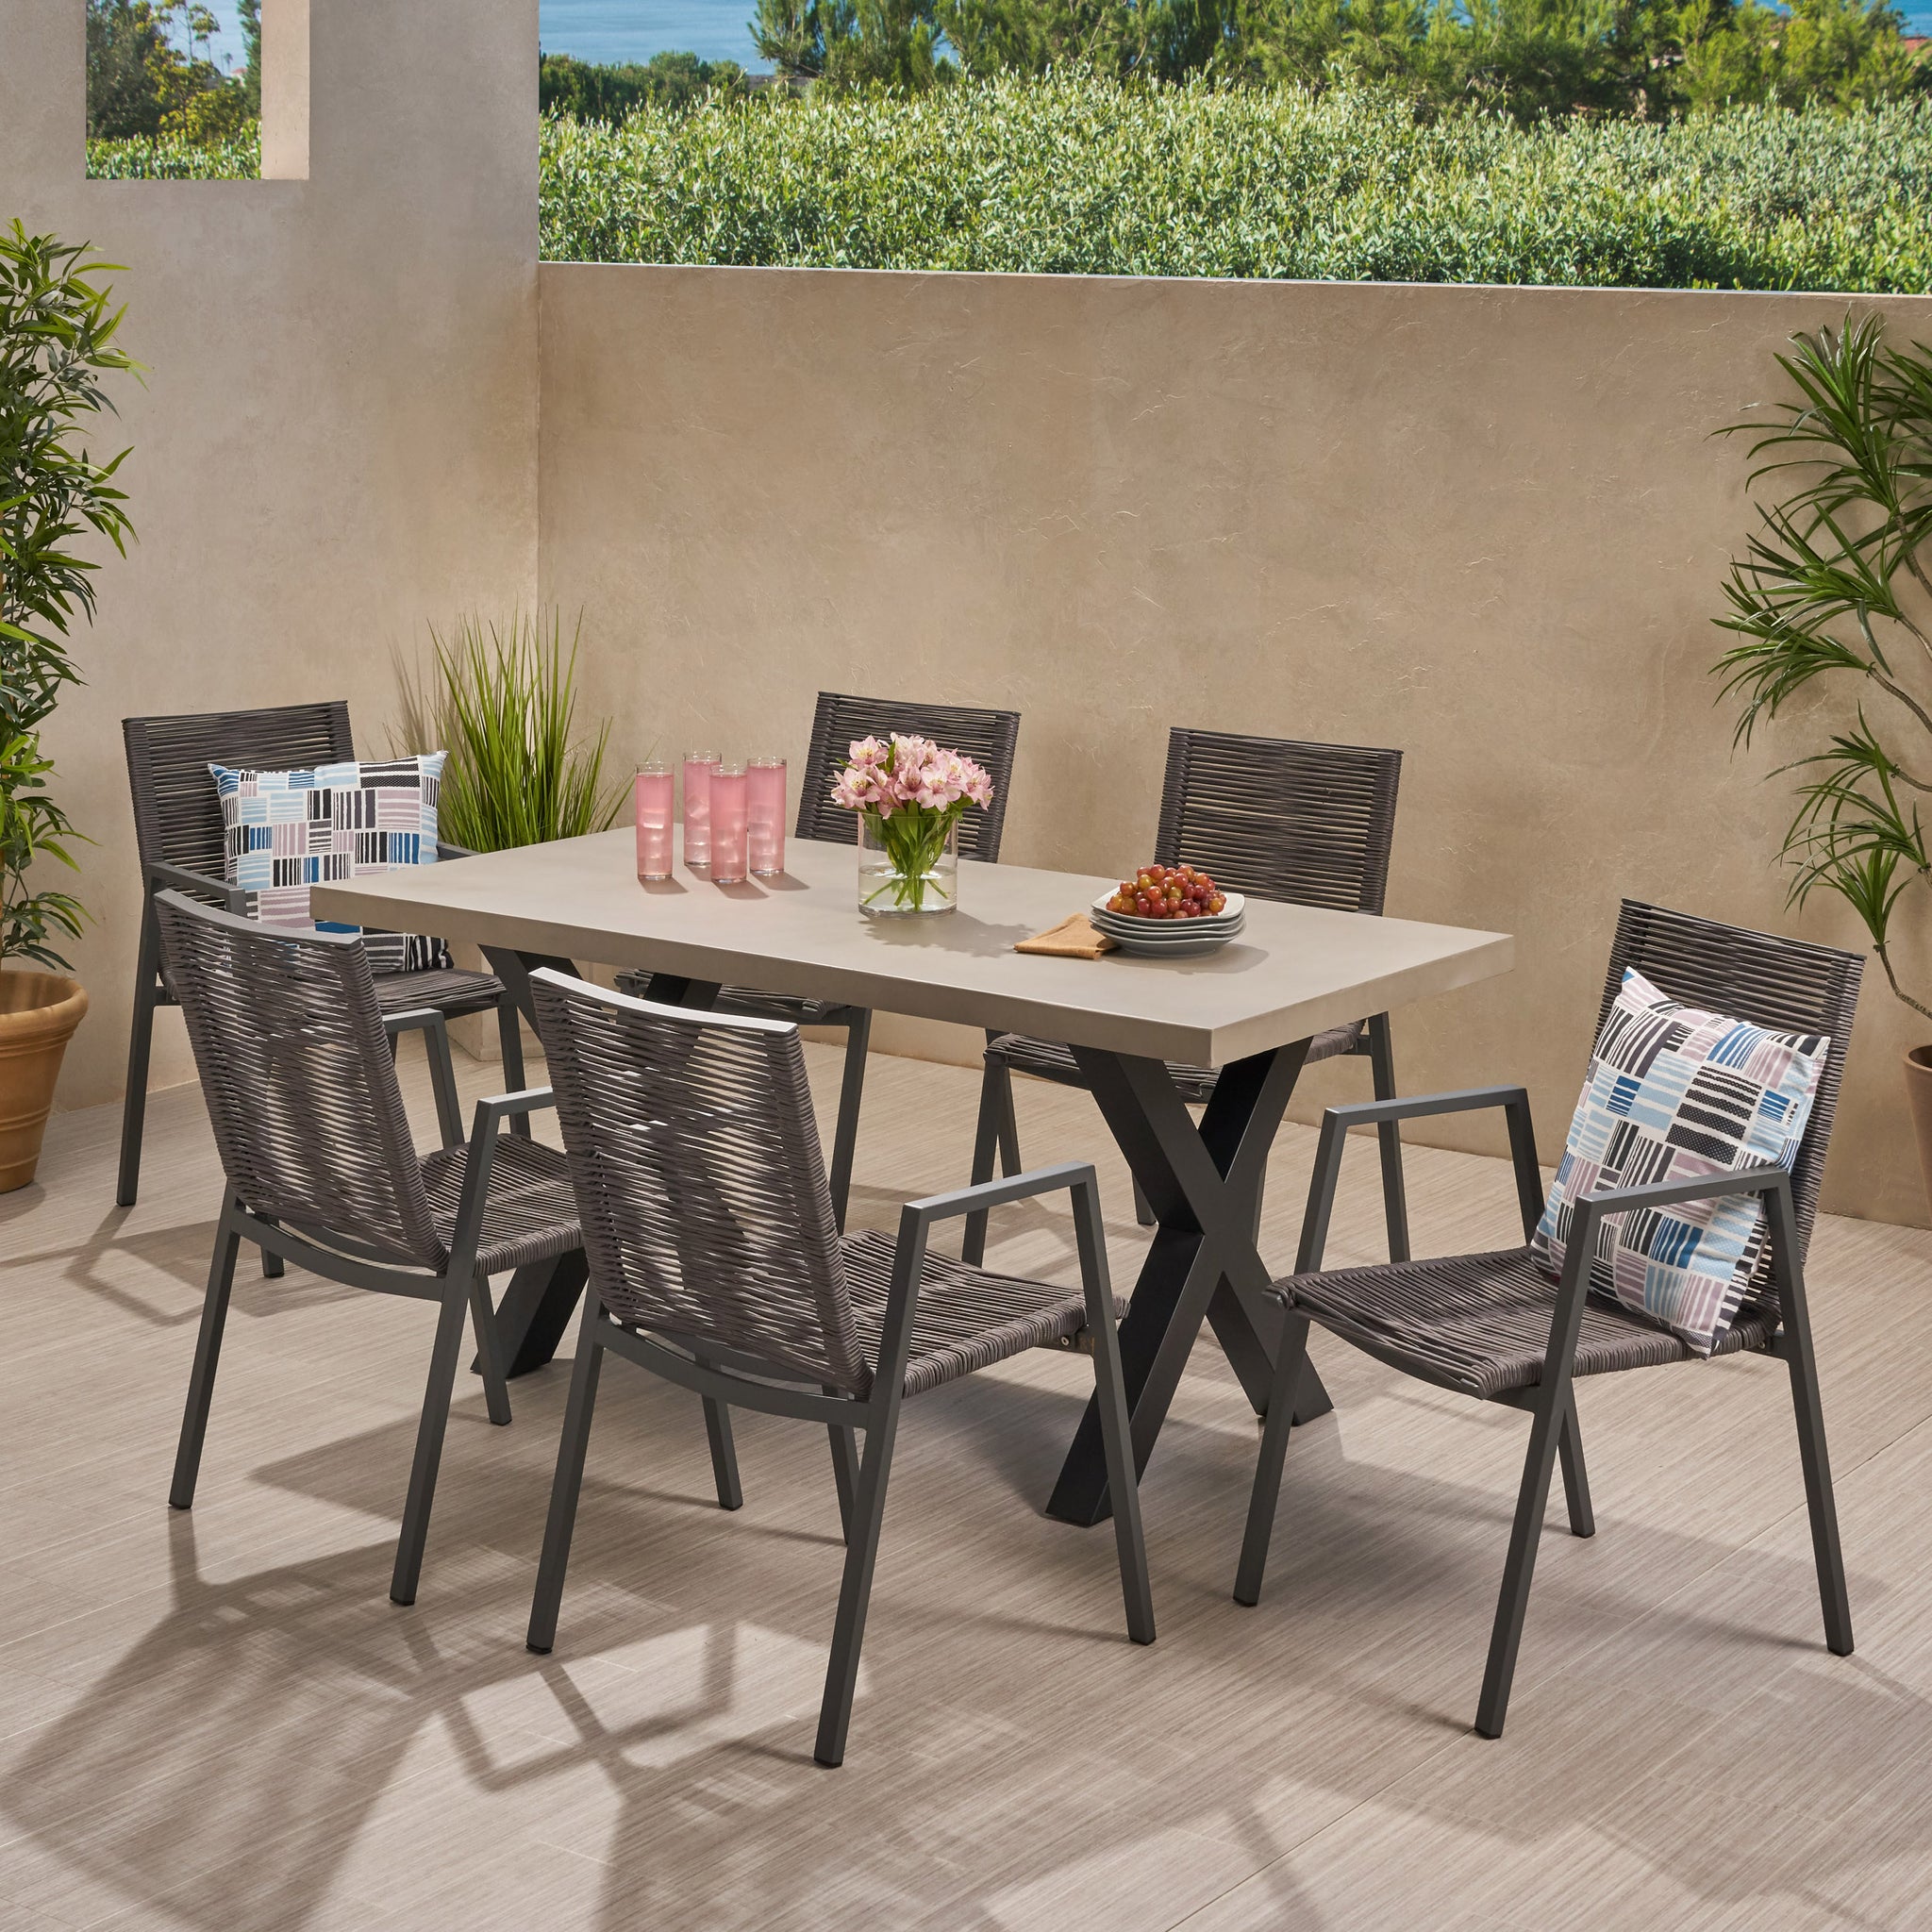 Aisaiah Outdoor Modern 6 Seater Dining Set – GDFStudio